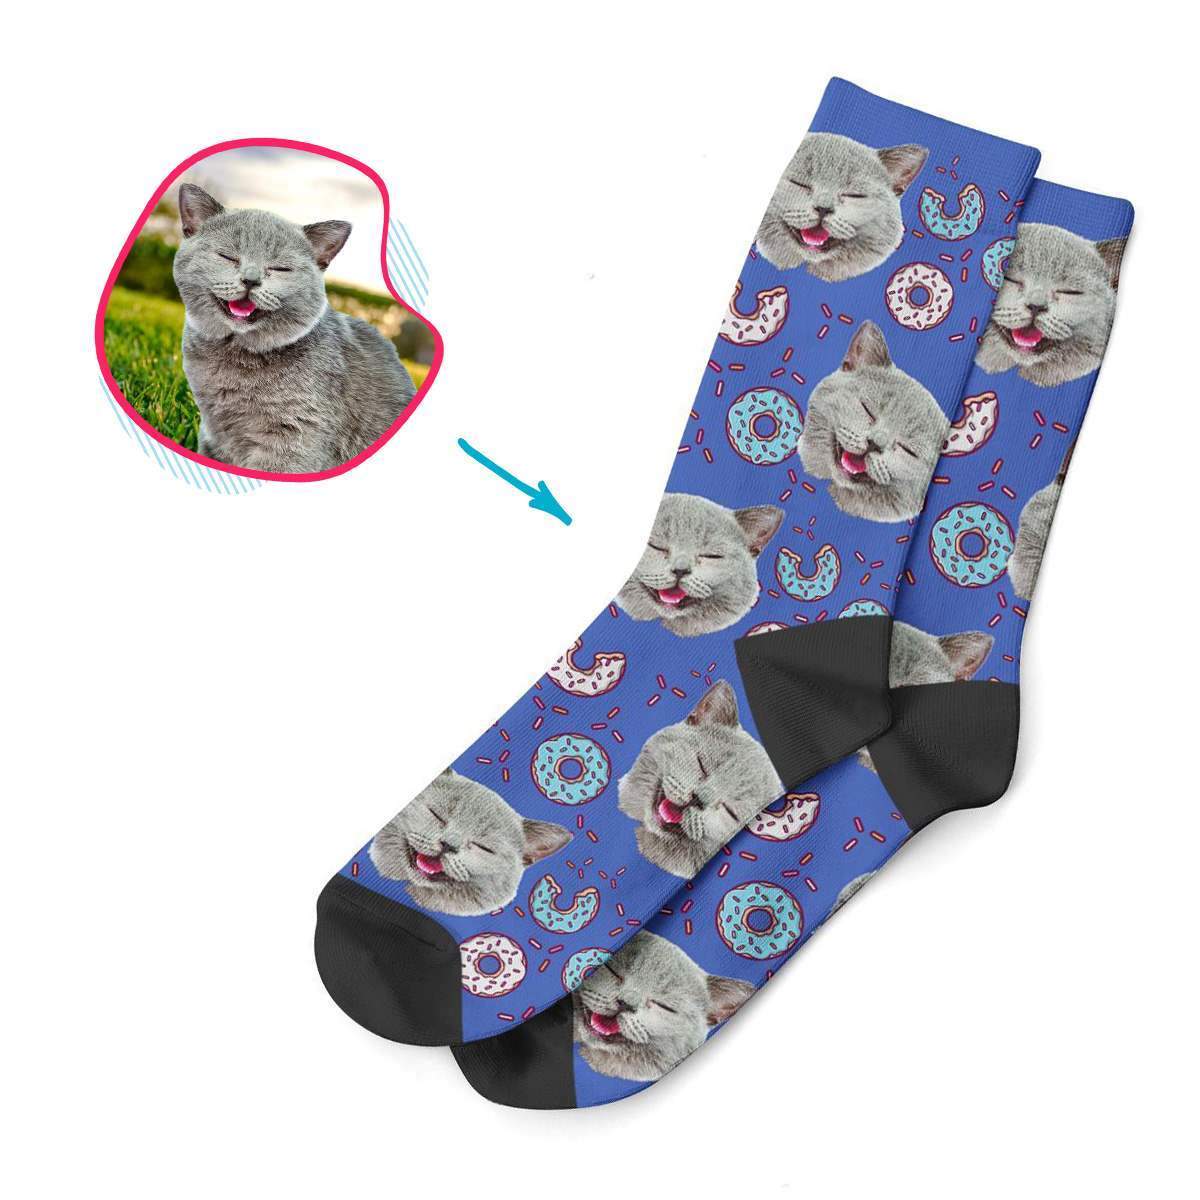 darkblue Donuts socks personalized with photo of face printed on them